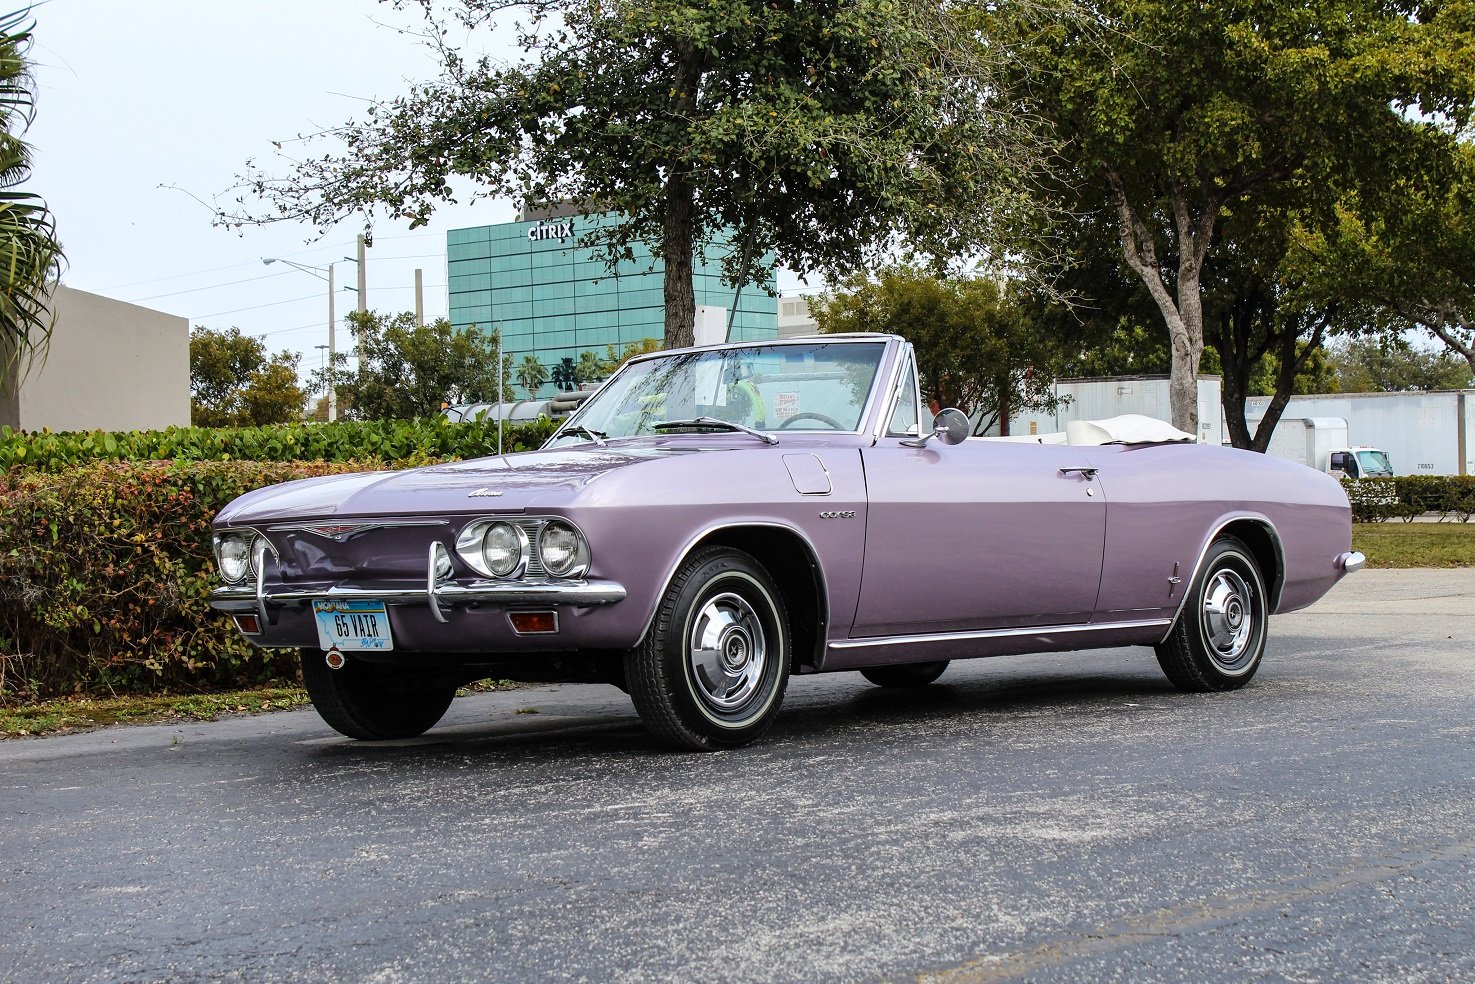 1965, Chevrolet, Corvair, Corsa, Turbocharged, Convertible, Cars, Classic Wallpaper